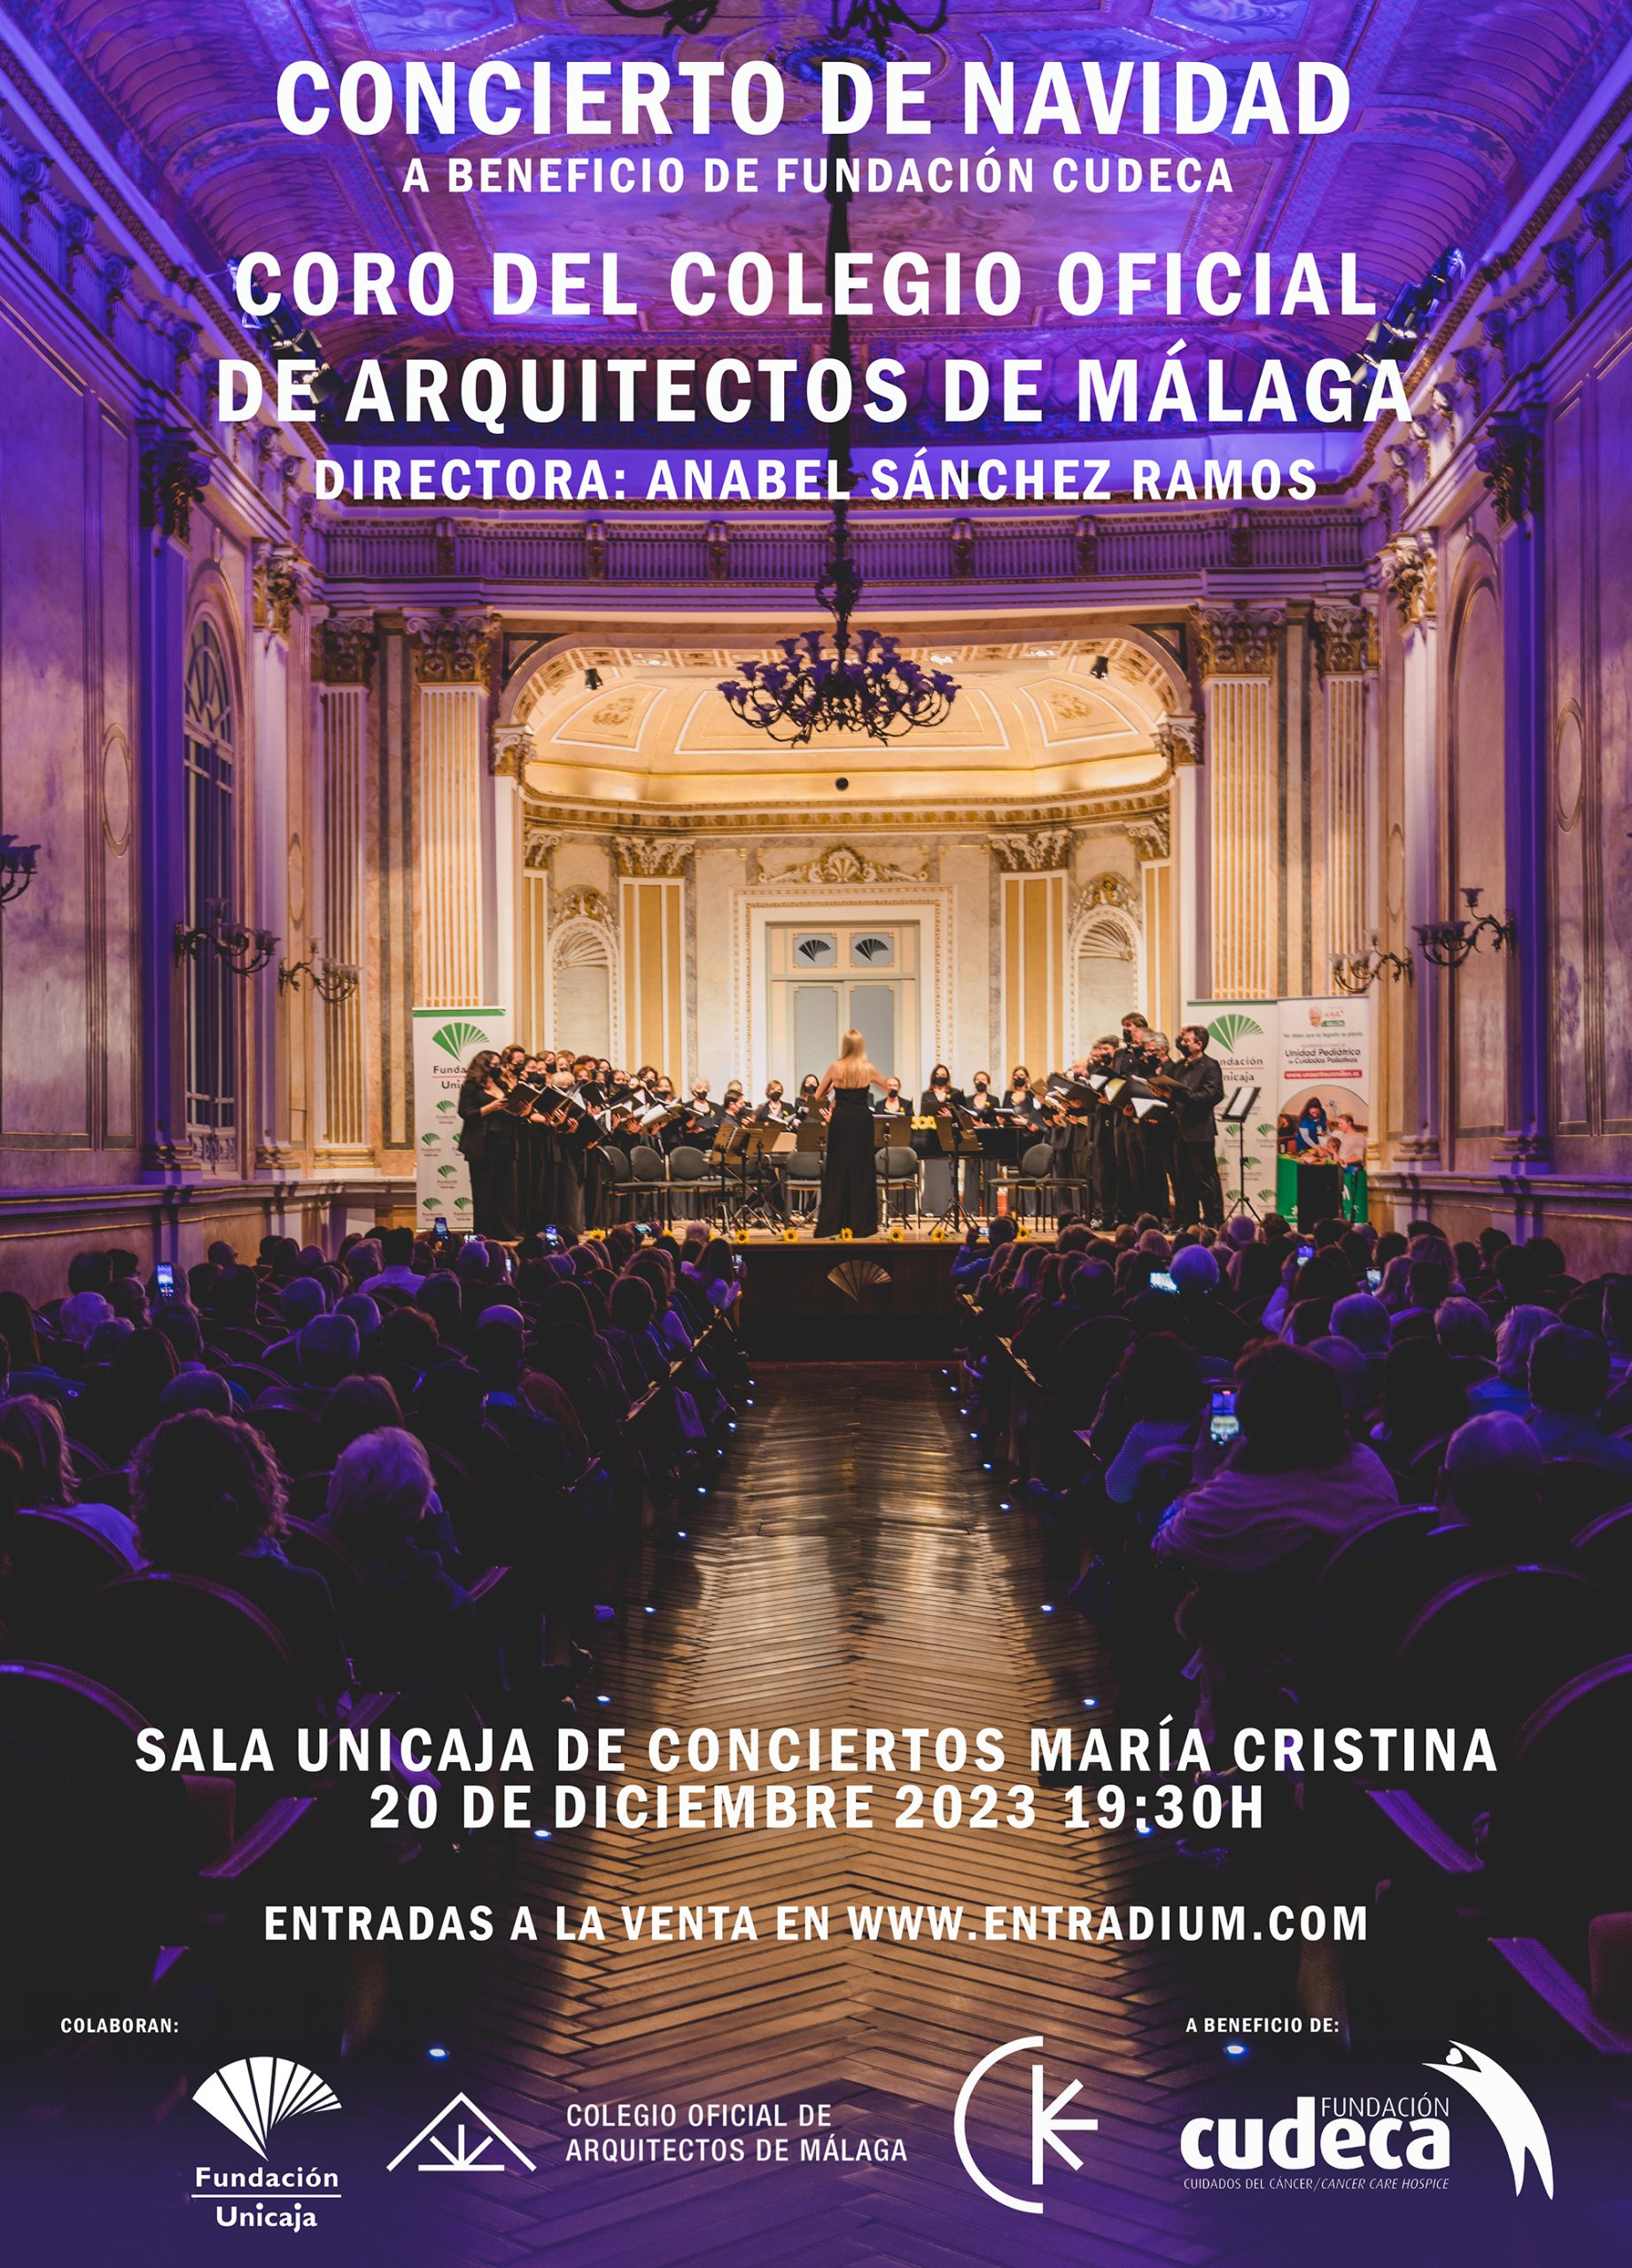 Christmas Concert by the Choir of the Official College of Architects of Malaga in aid of CUDECA